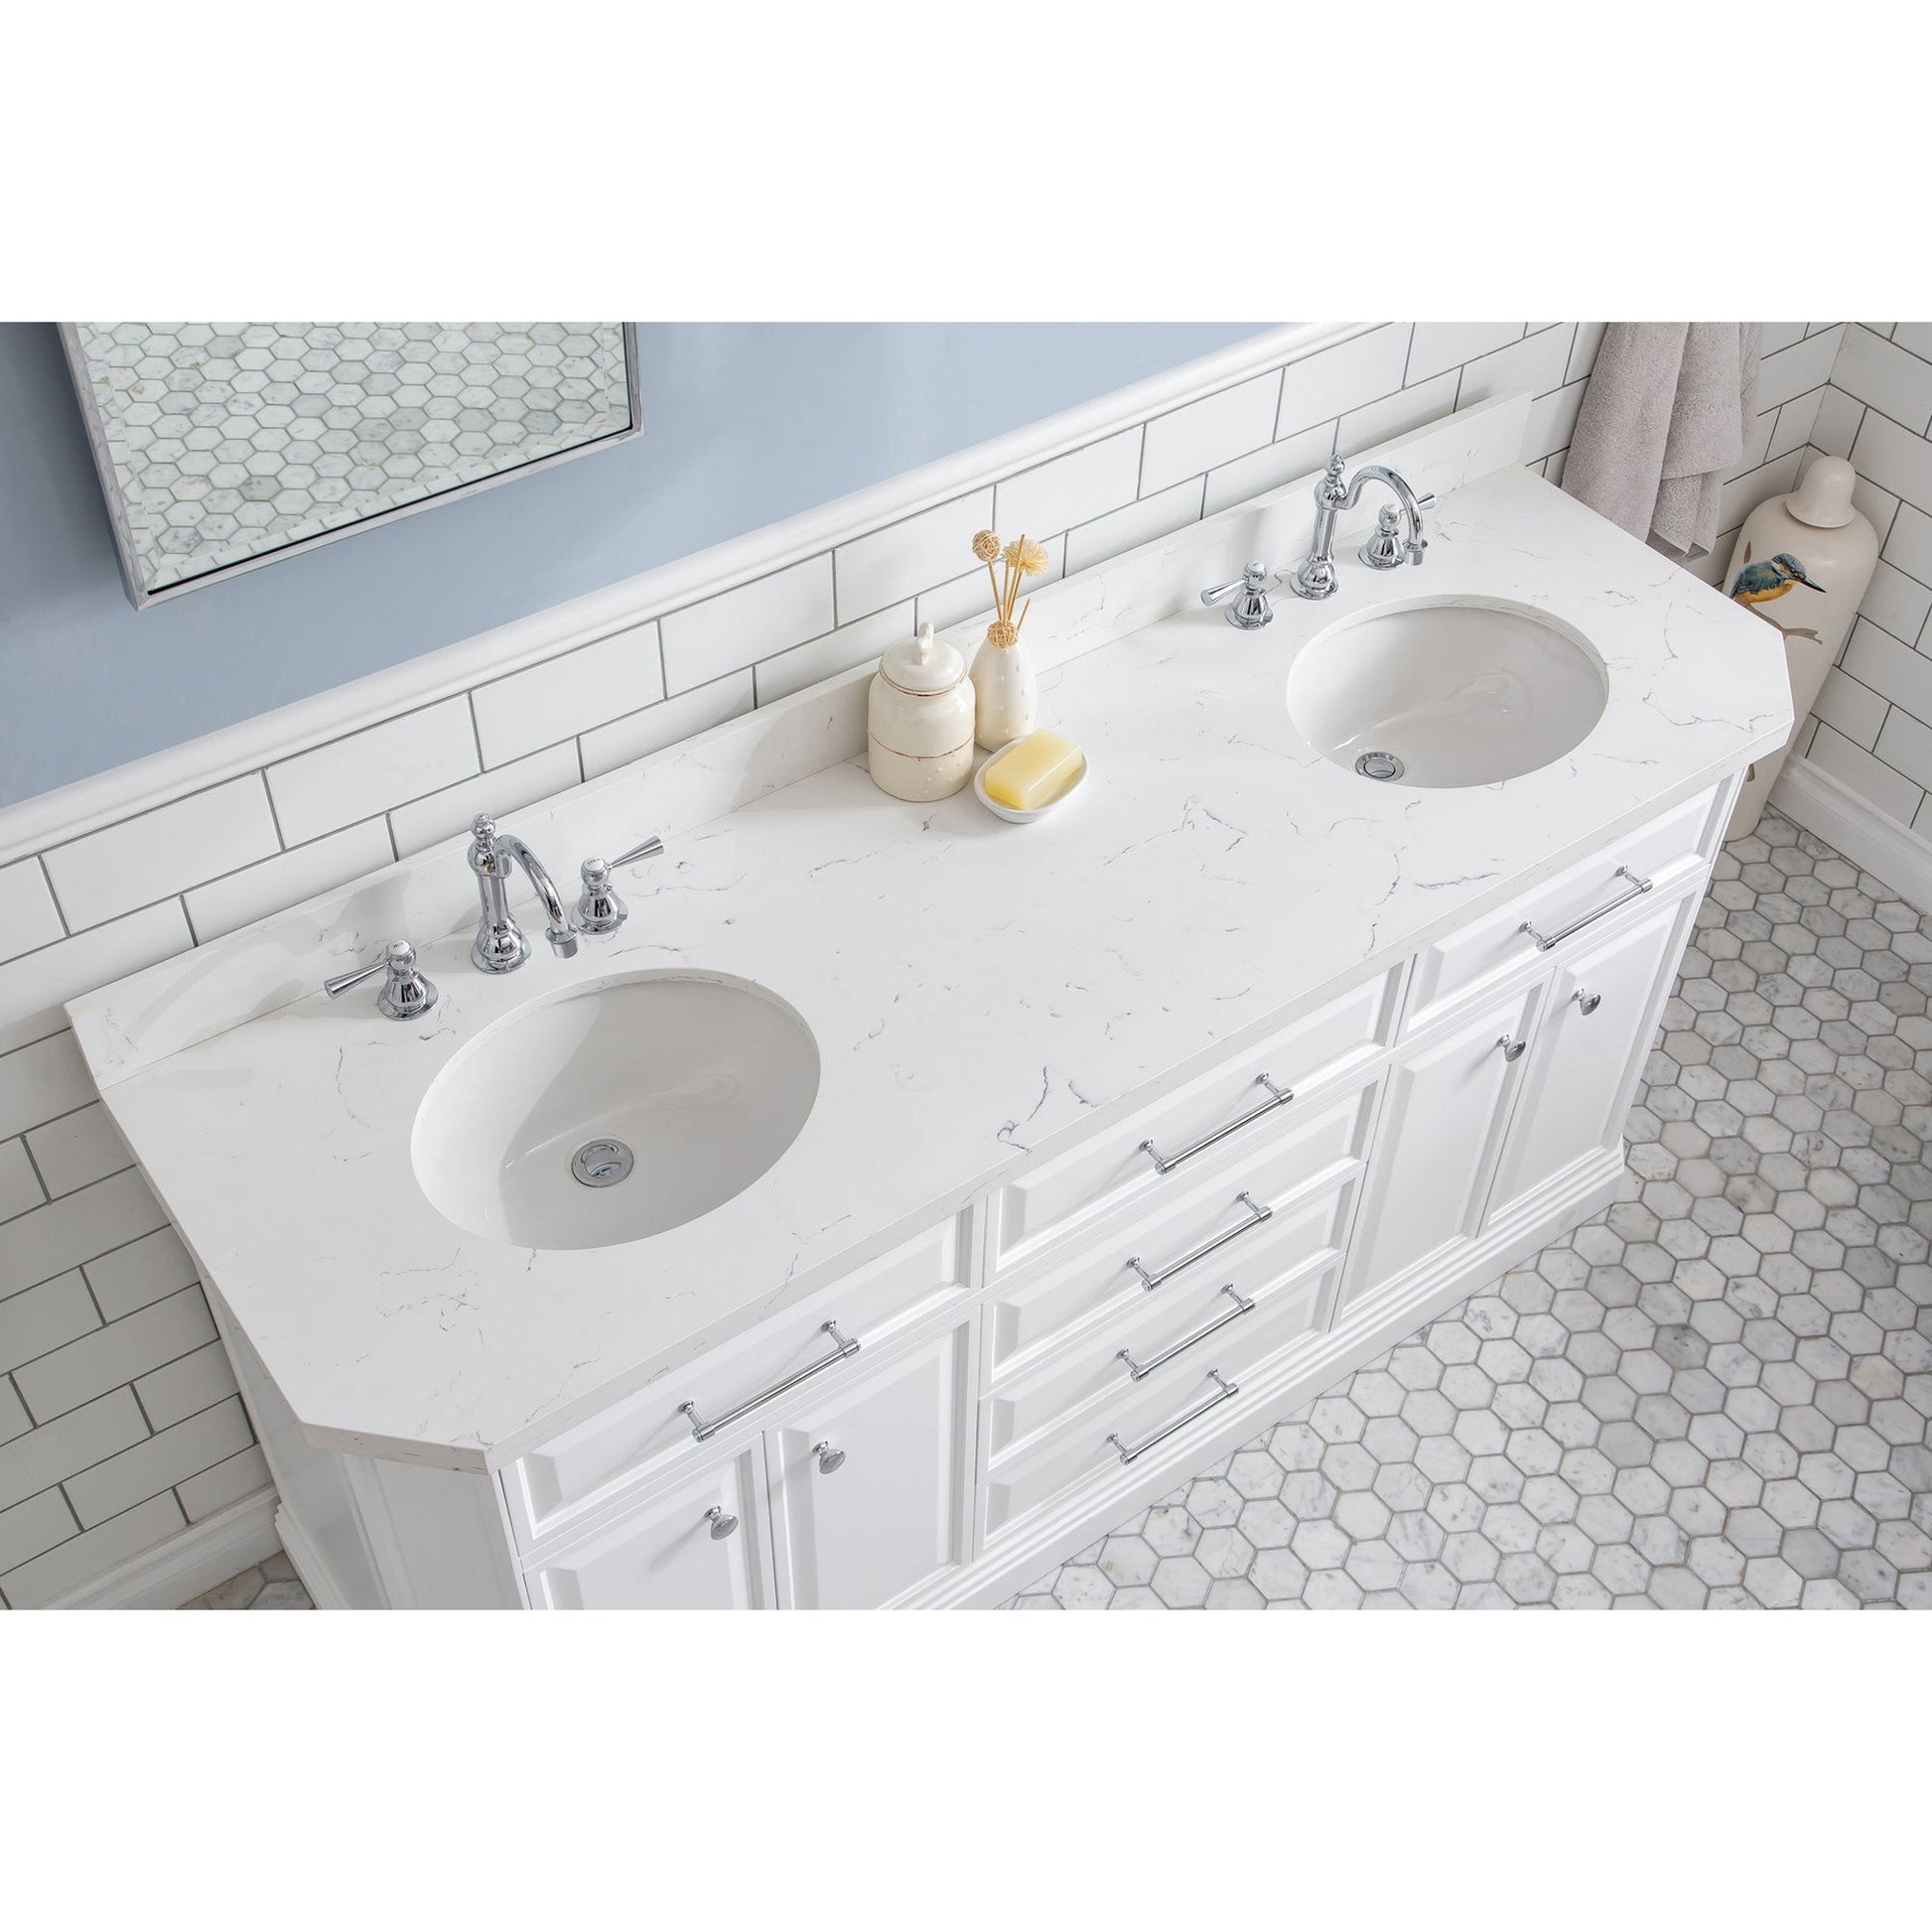 Water Creation Palace 72" Quartz Carrara Pure White Bathroom Vanity Set With Hardware And F2-0012 Faucets in Chrome Finish